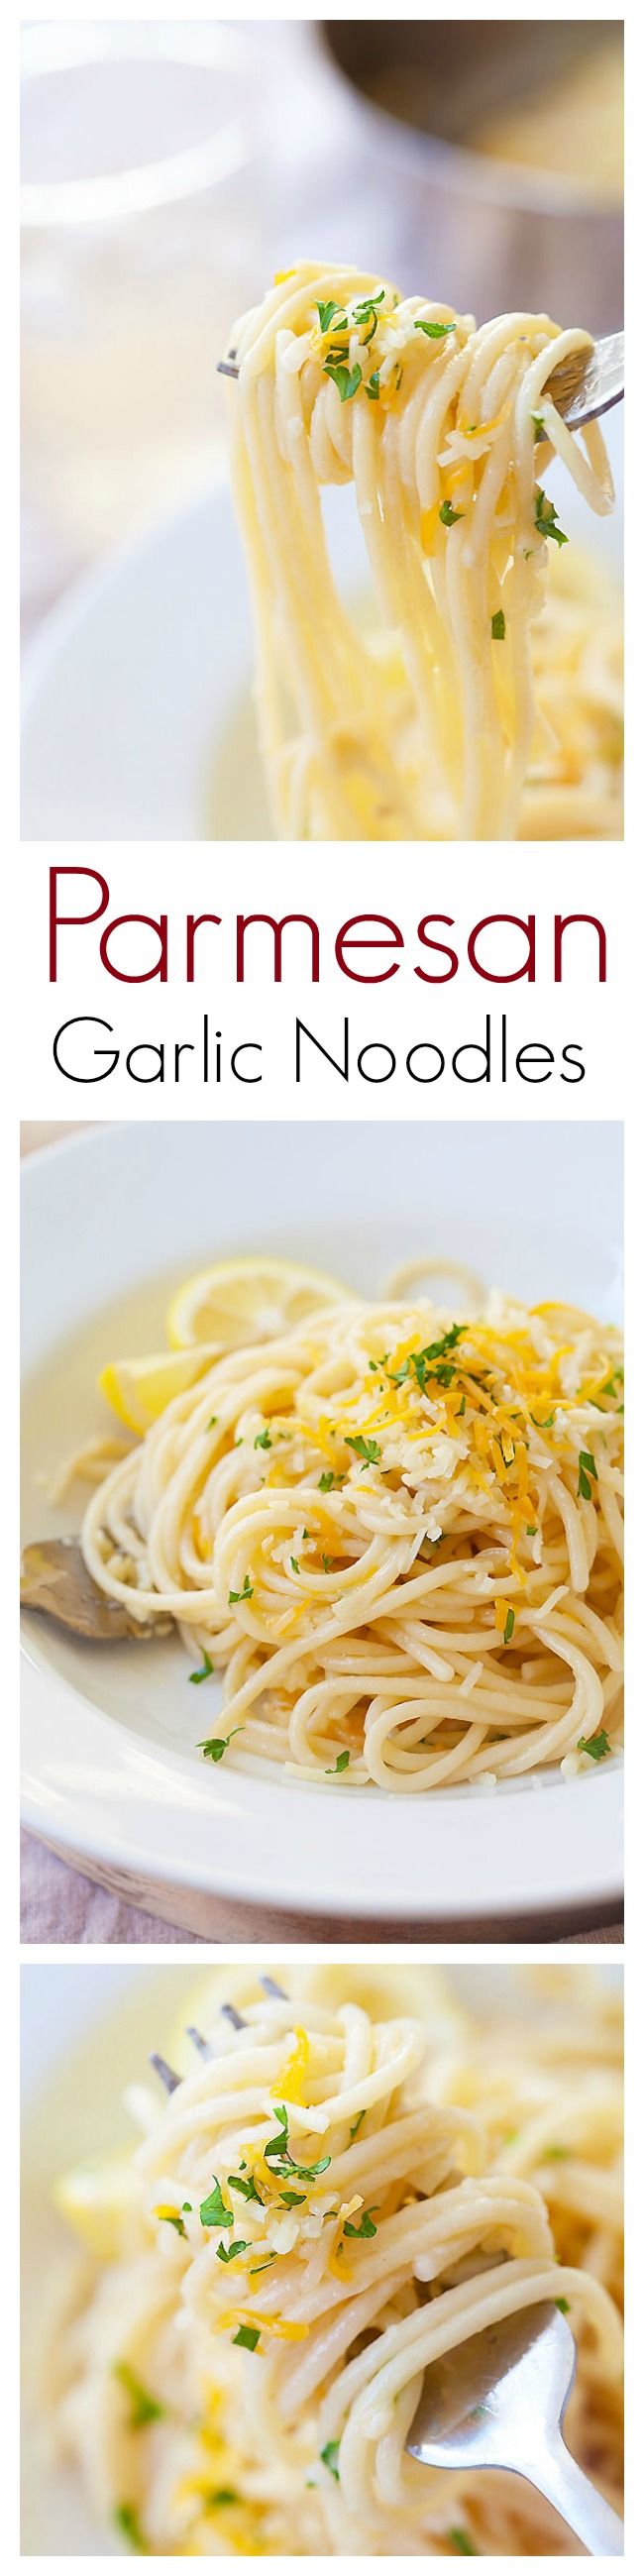 Quick and easy Parmesan Garlic Noodles with garlic and Parmesan cheese. This Parmesan Garlic Noodles recipe takes 20 mins and great for the entire family | rasamalaysia.com